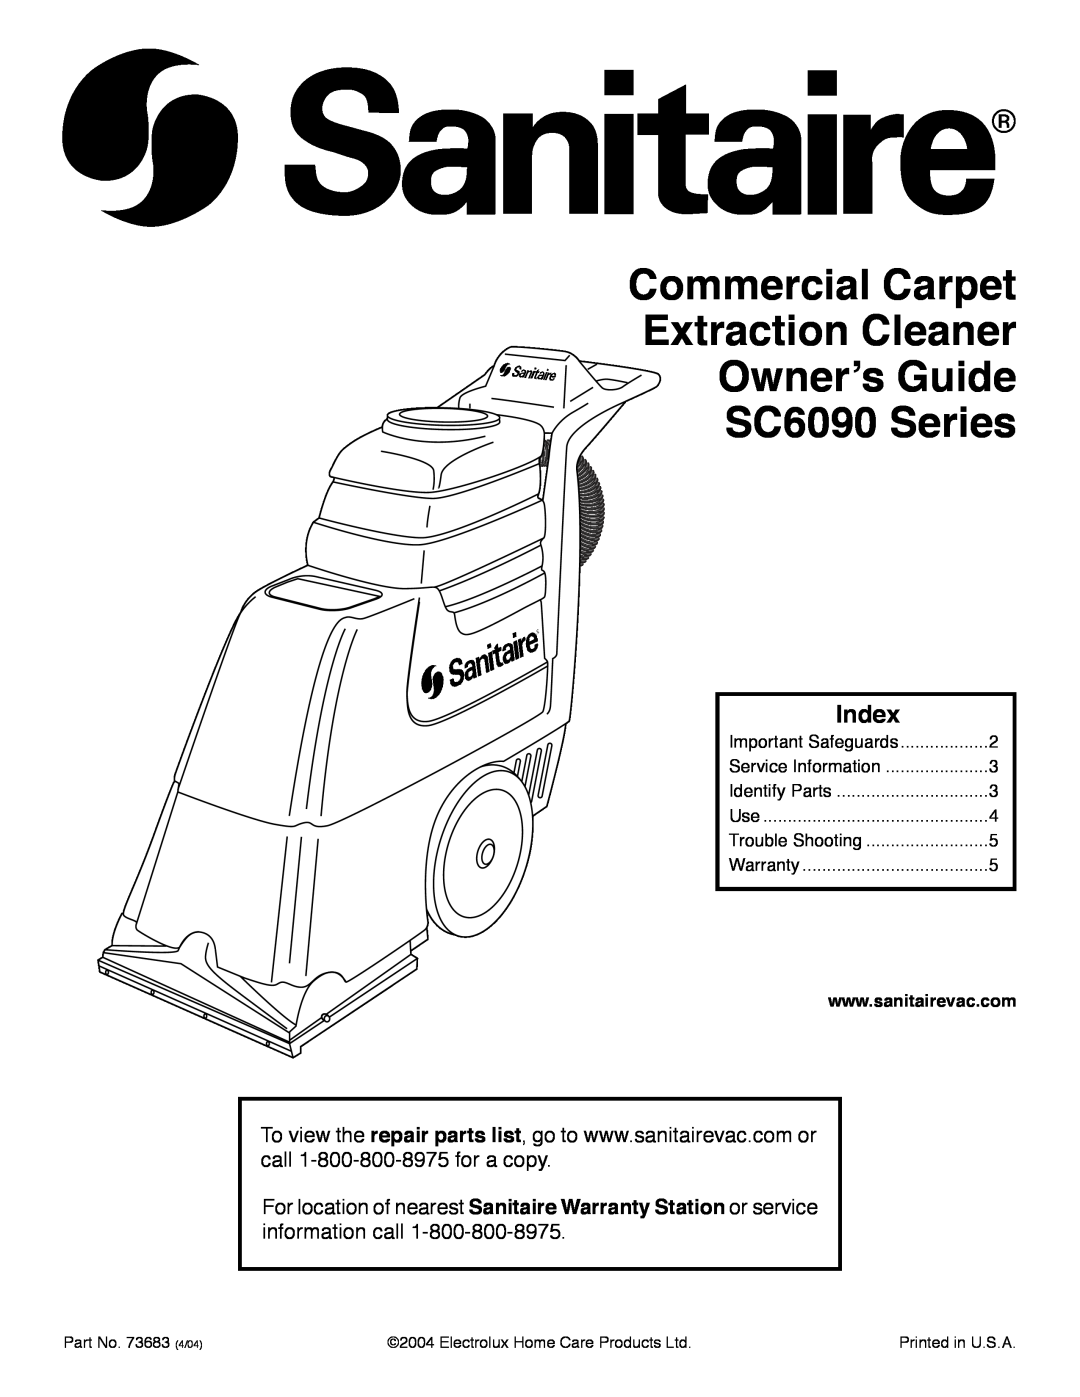 Sanitaire warranty Commercial Carpet Extraction Cleaner Ownerʼs Guide SC6090 Series, Index 